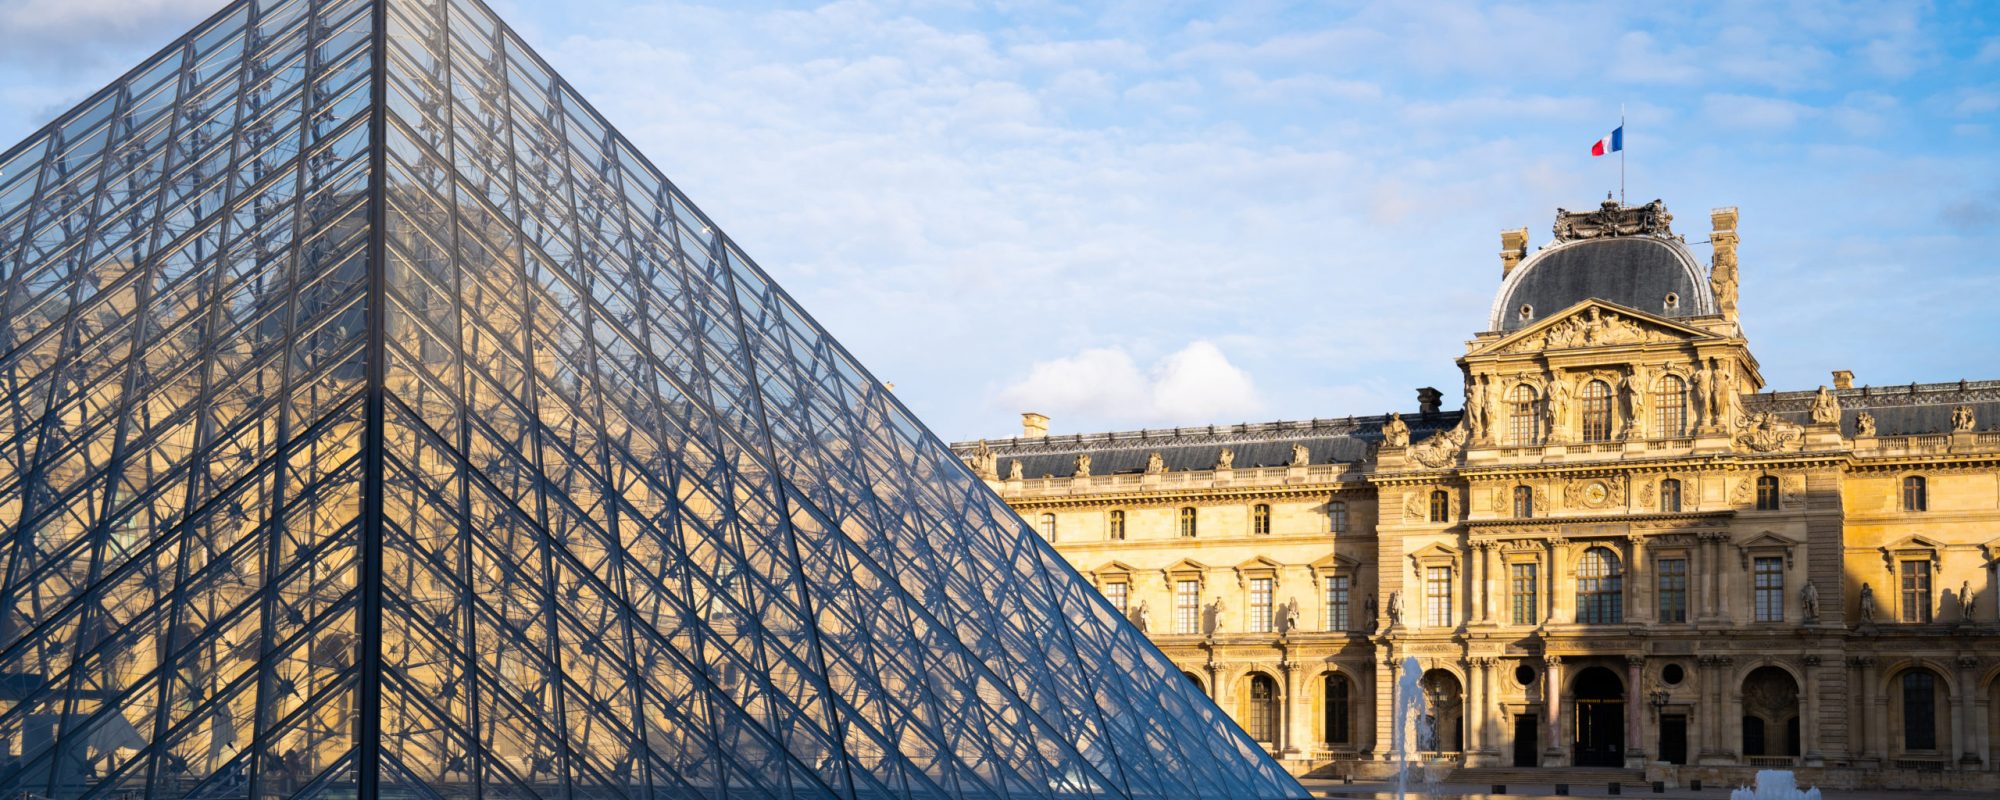 Paris, France - October 15, 2019: Louvre Museum and Pyramid entrance. Famous attraction in Paris.